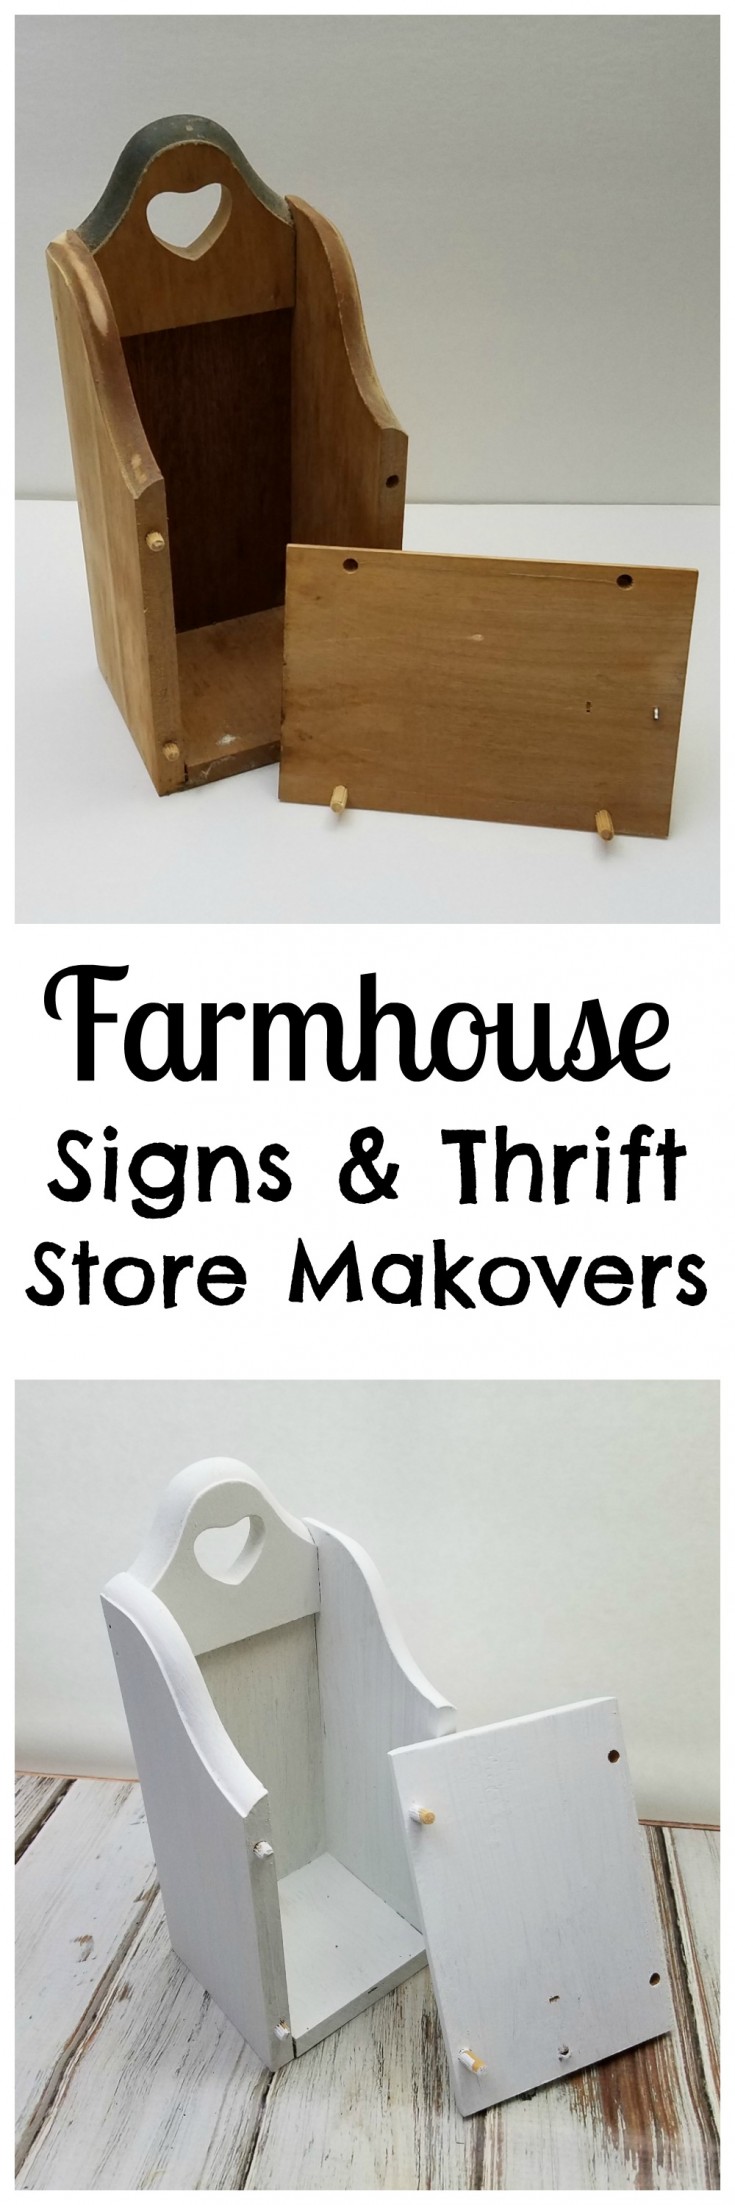 farmhouse signs and thrift store makeovers